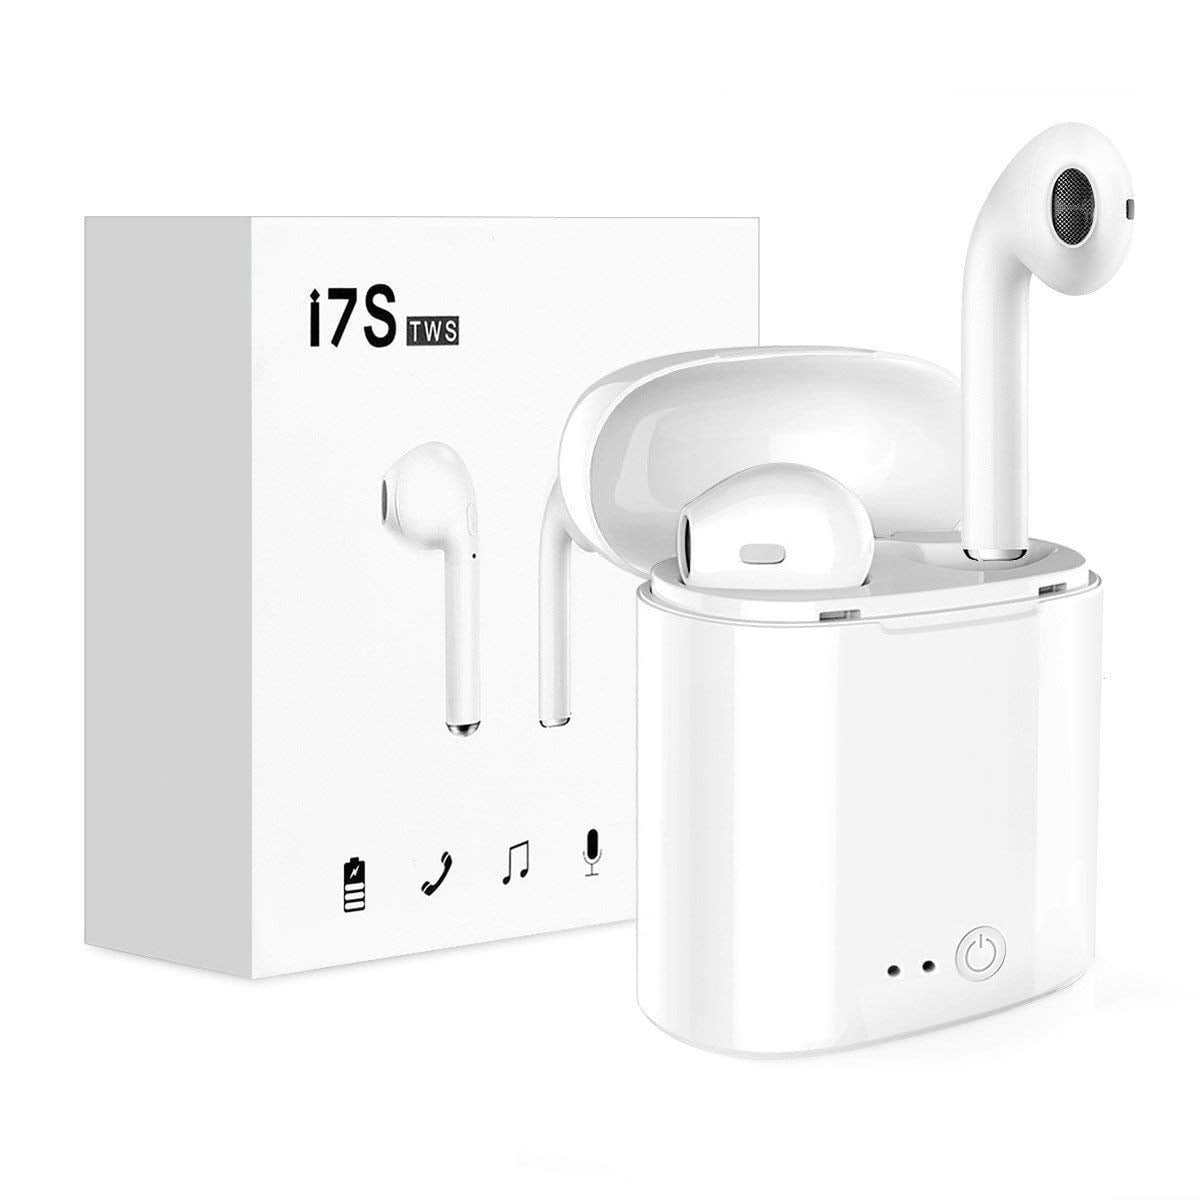 Bluetooth Headphones, Wireless Earbuds Stereo Earphone Cordless Sport Headsets for iphone 8, 8 plus, X, 7, 7 plus, 6s, 6S Plus -White